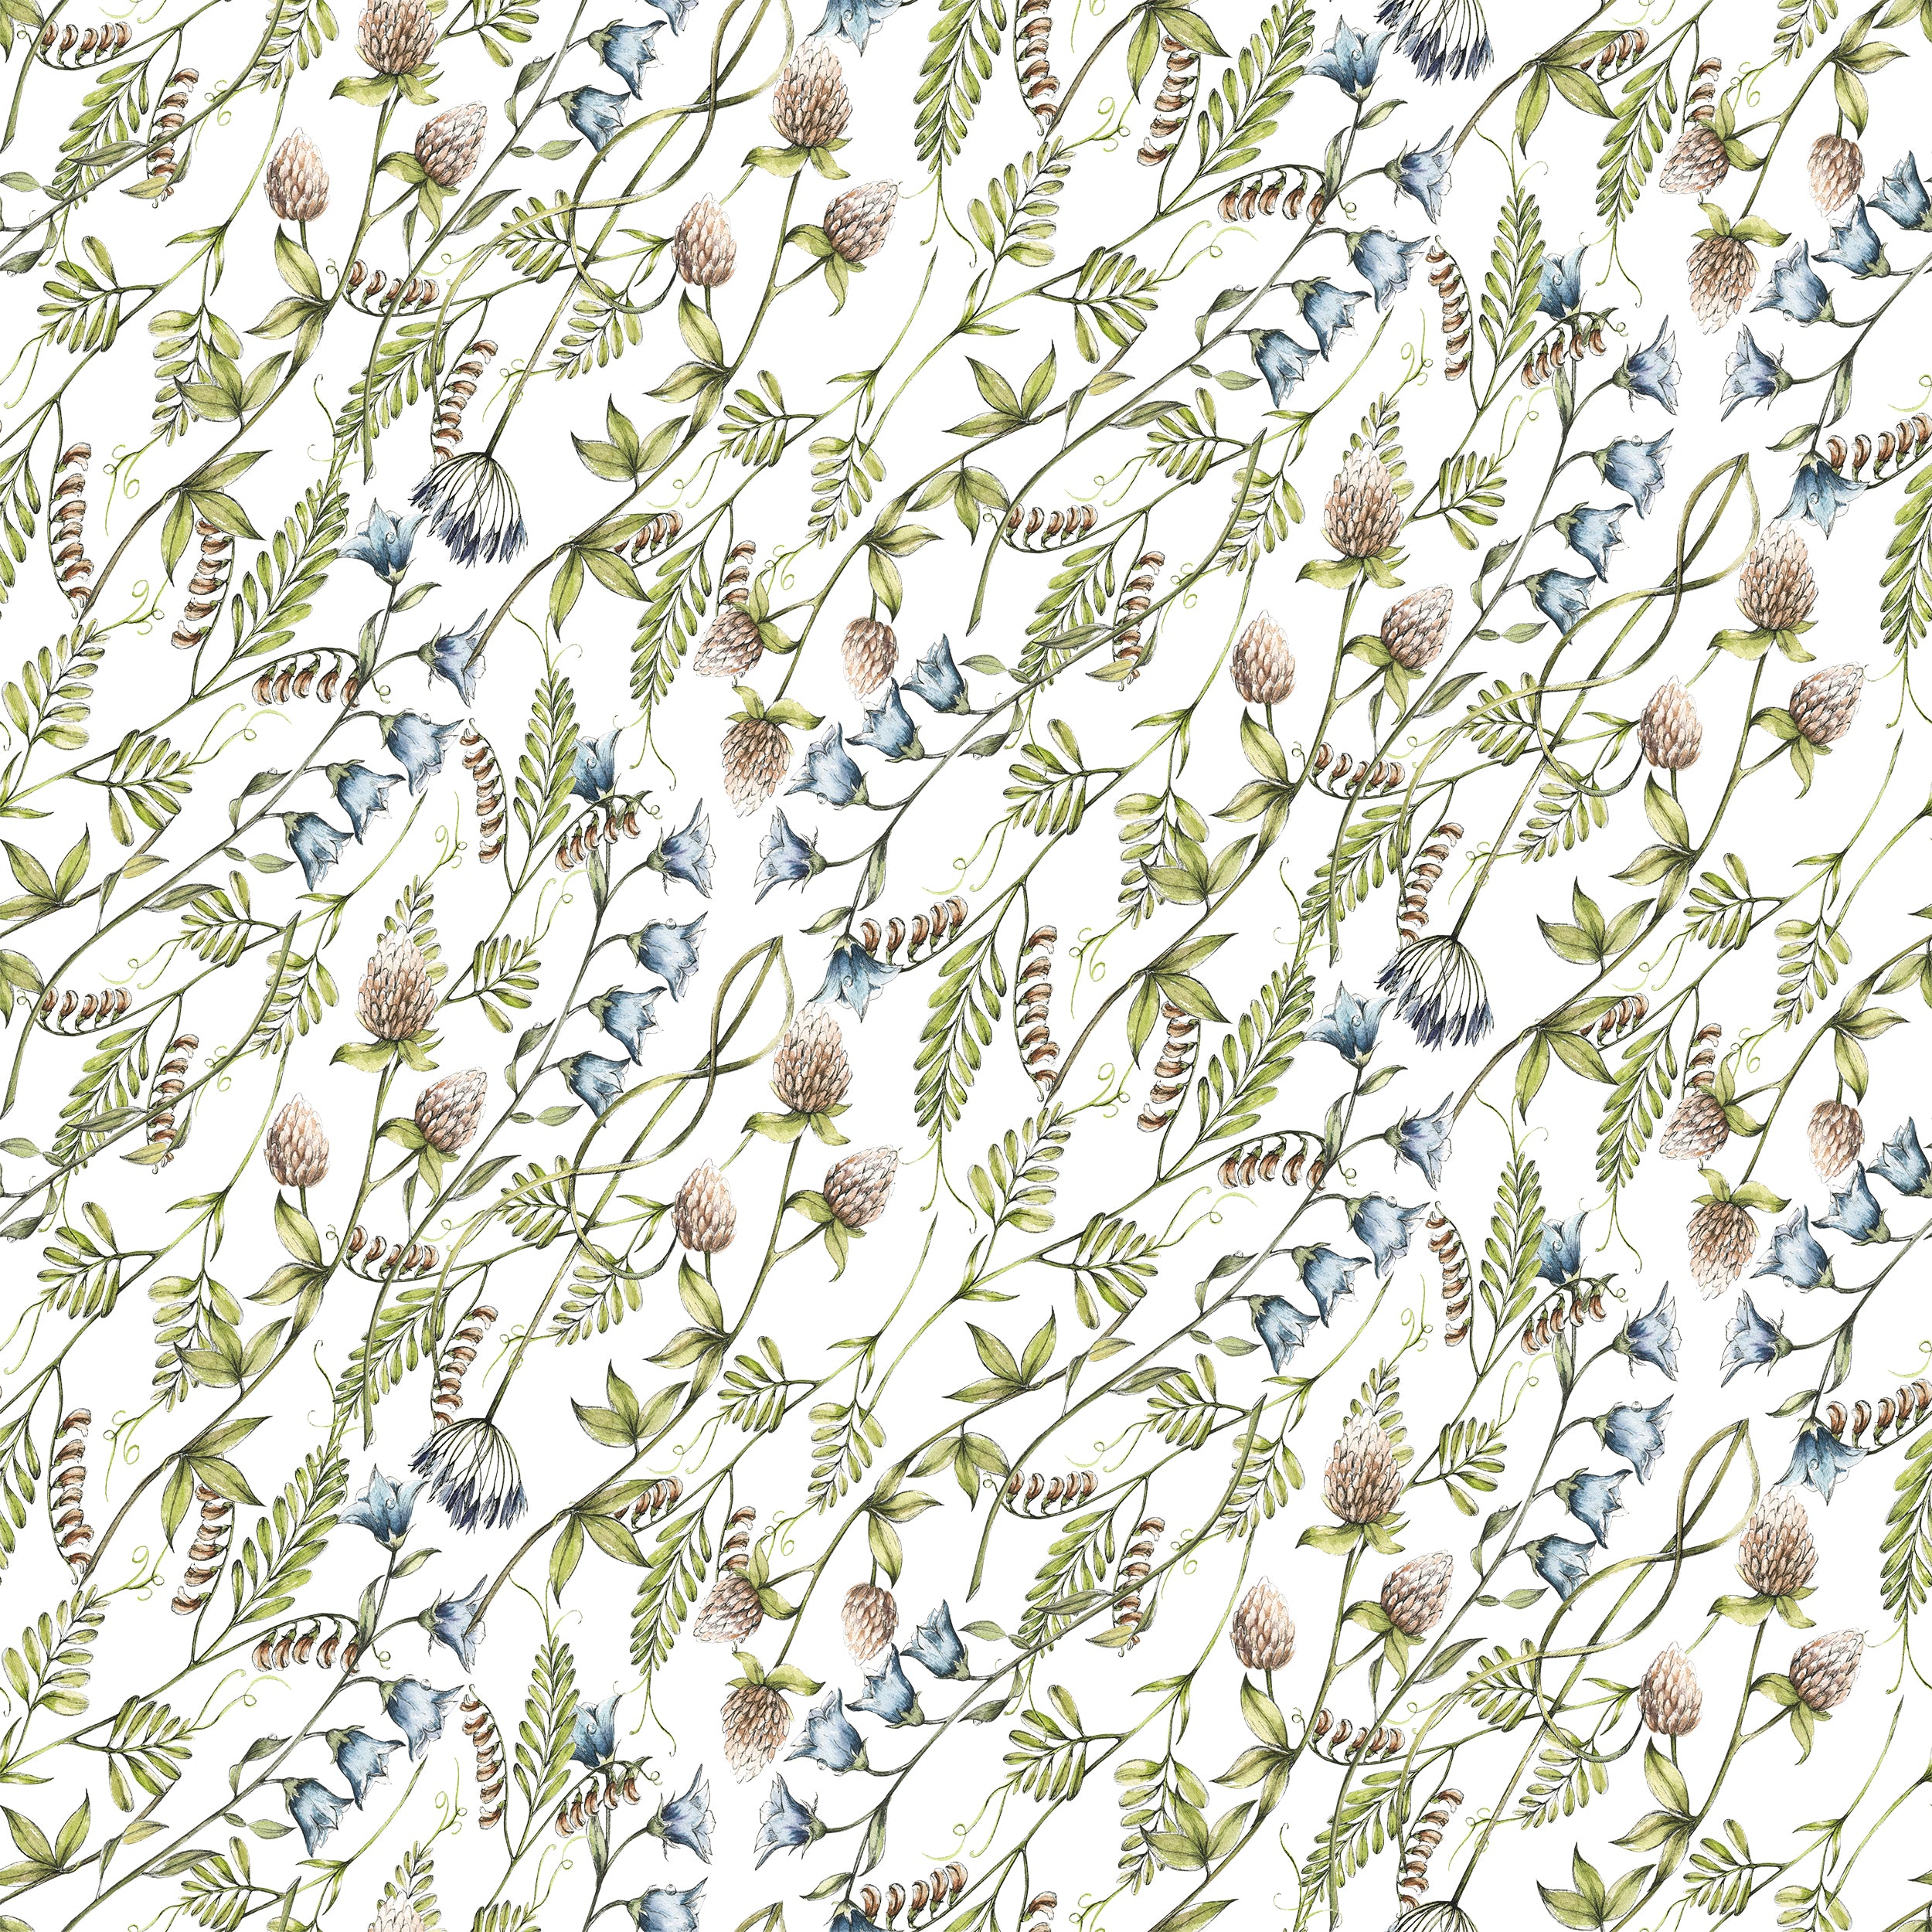 A seamless pattern design showcasing 'Watercolour Botanical Wildflowers' in a repeating layout. The design features an array of wildflower illustrations, including blooms, leaves, and seed pods, in soft watercolor hues of blues, greens, and neutrals on a clean white background.